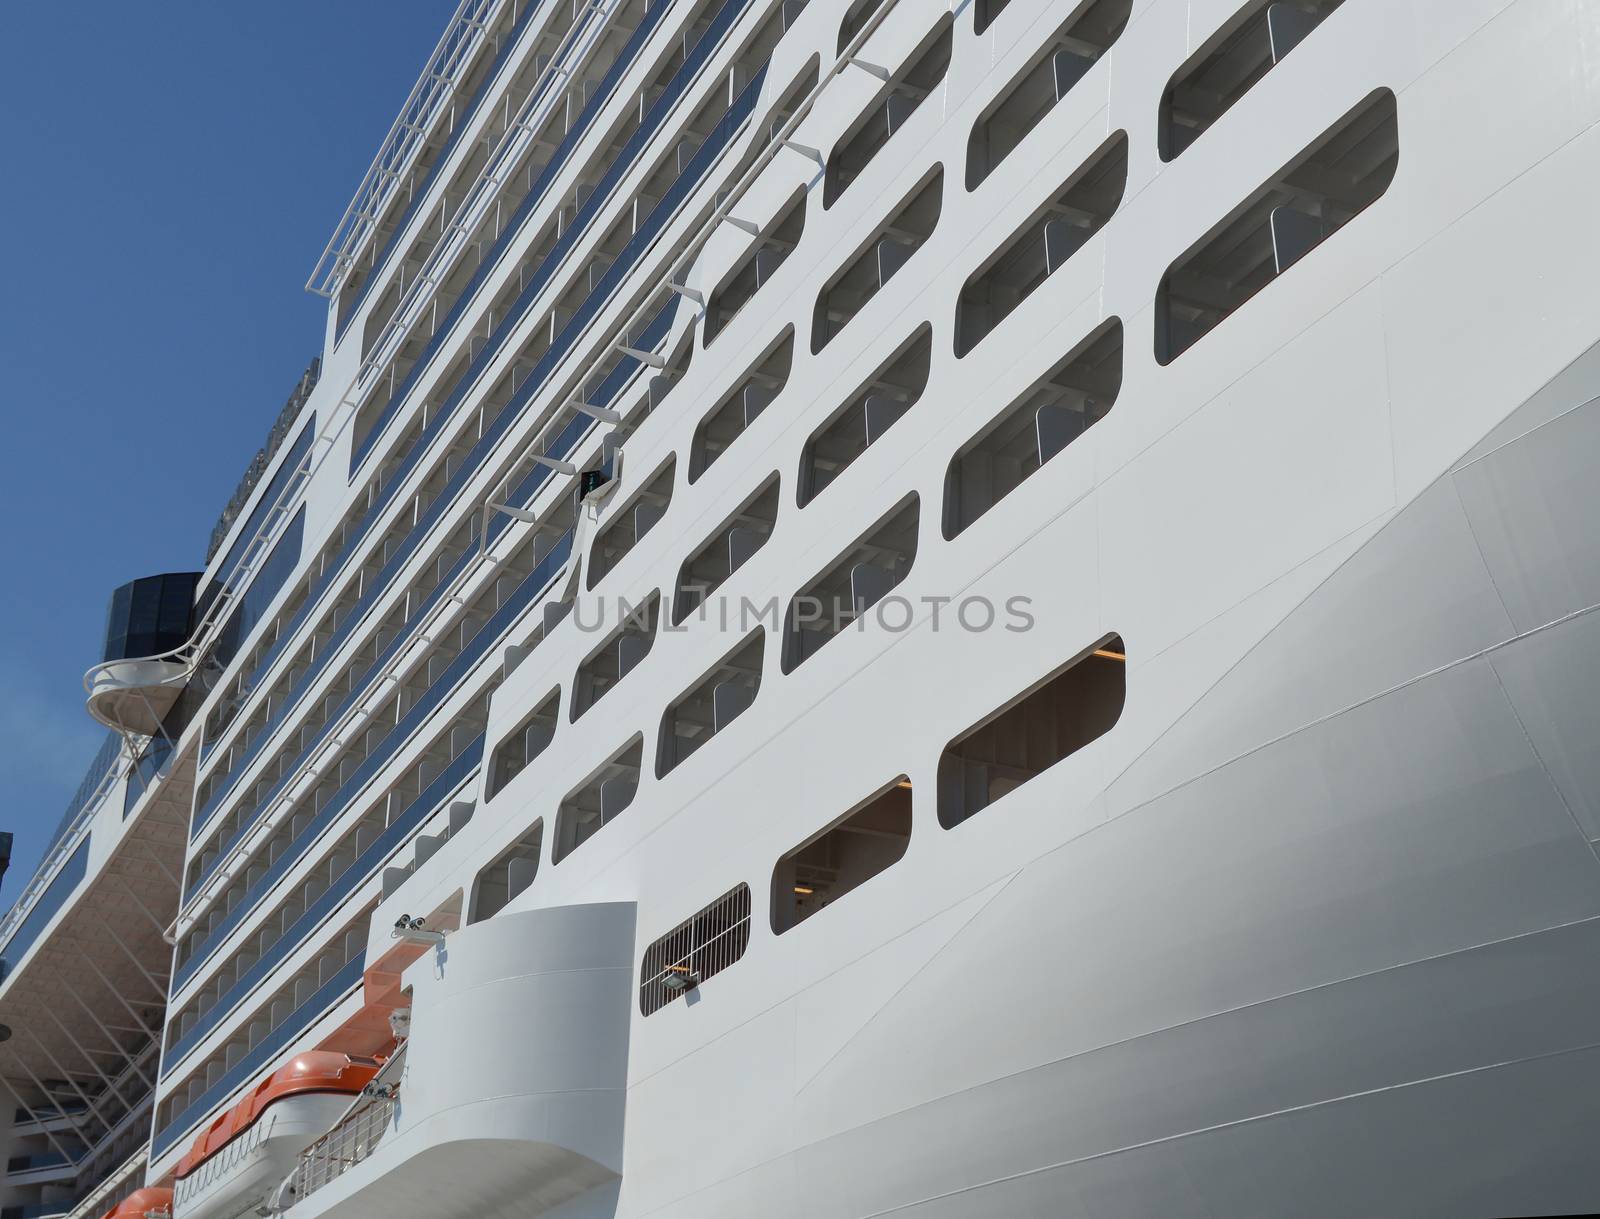 Luxury white cruise ship on blue sky background close-up by claire_lucia